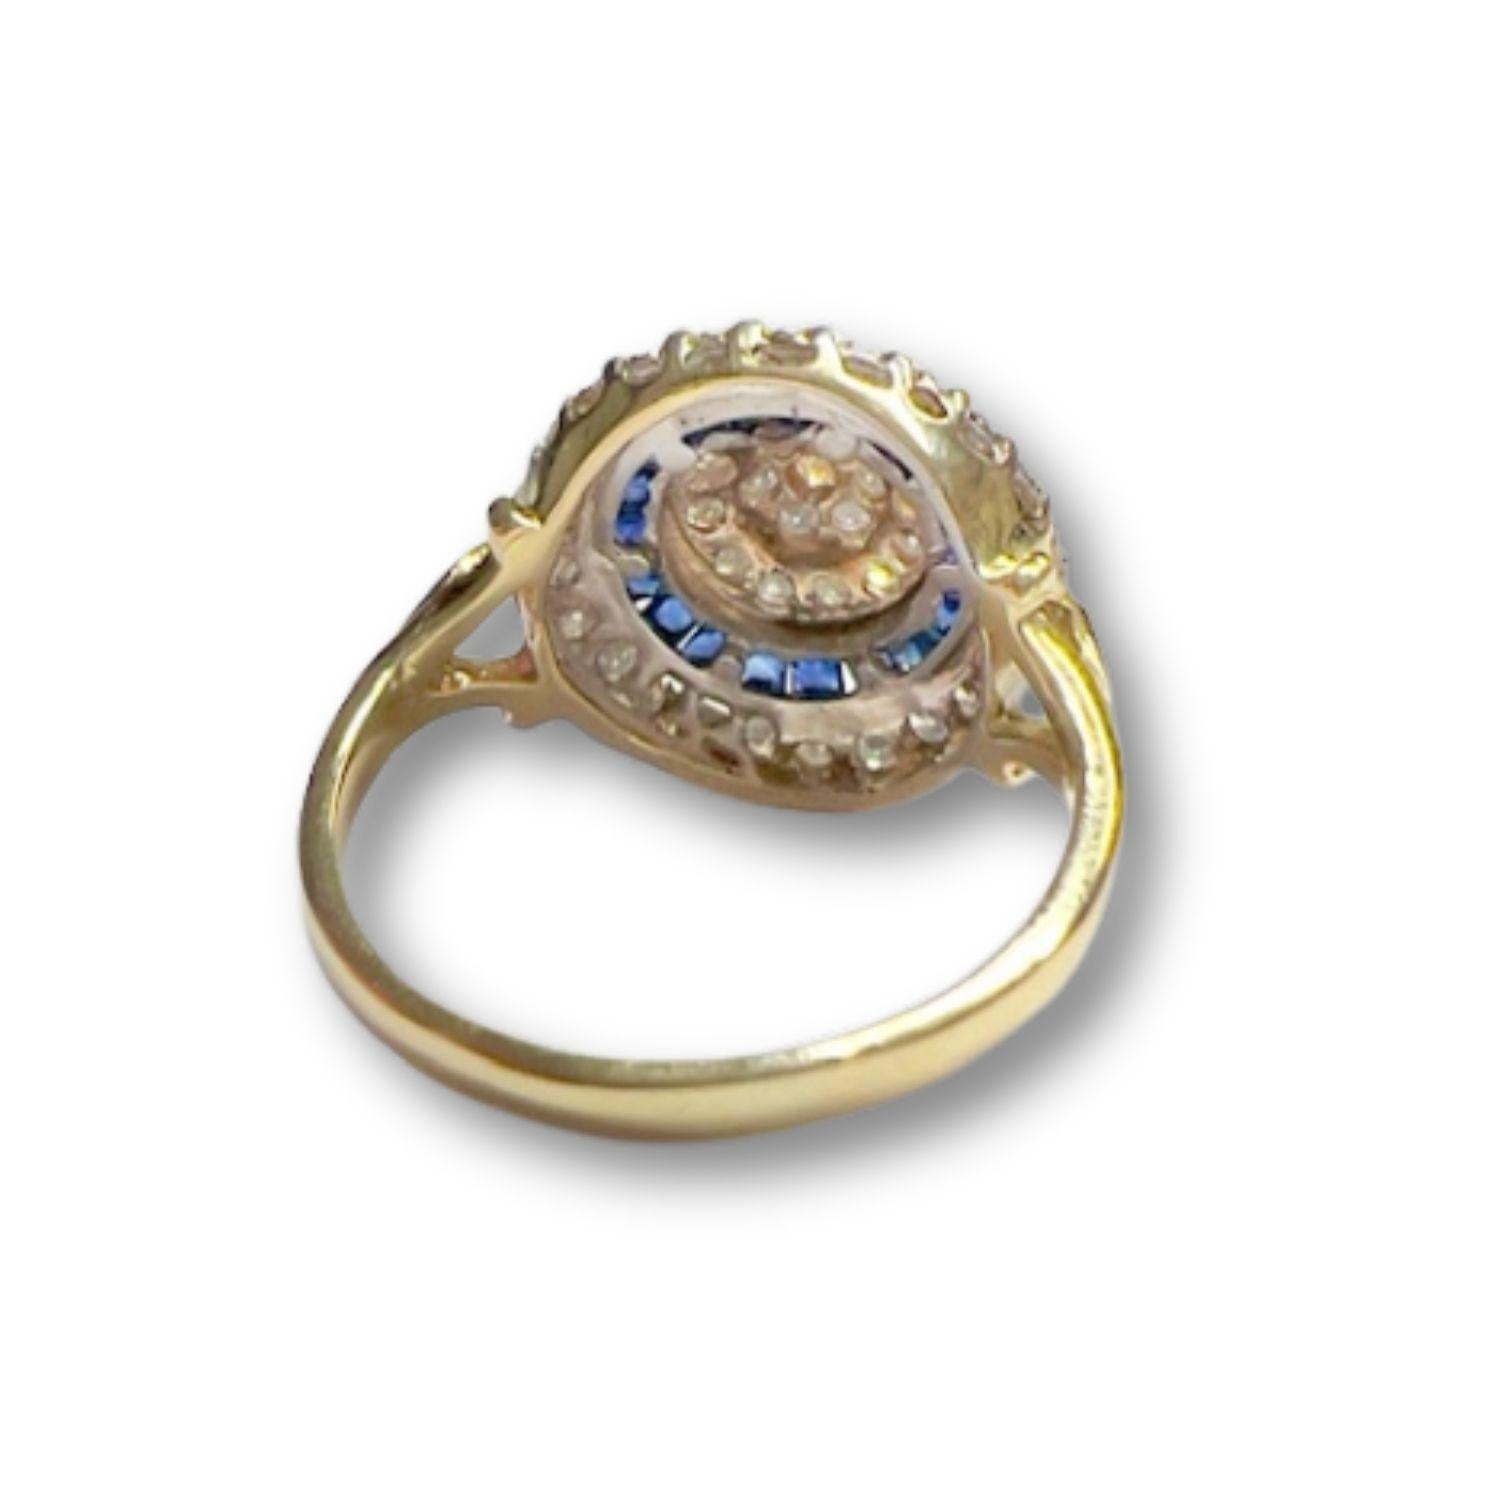 1940-1945 Art Deco Style Diamonds and Sapphire Yellow Gold and Platinum Ring 1